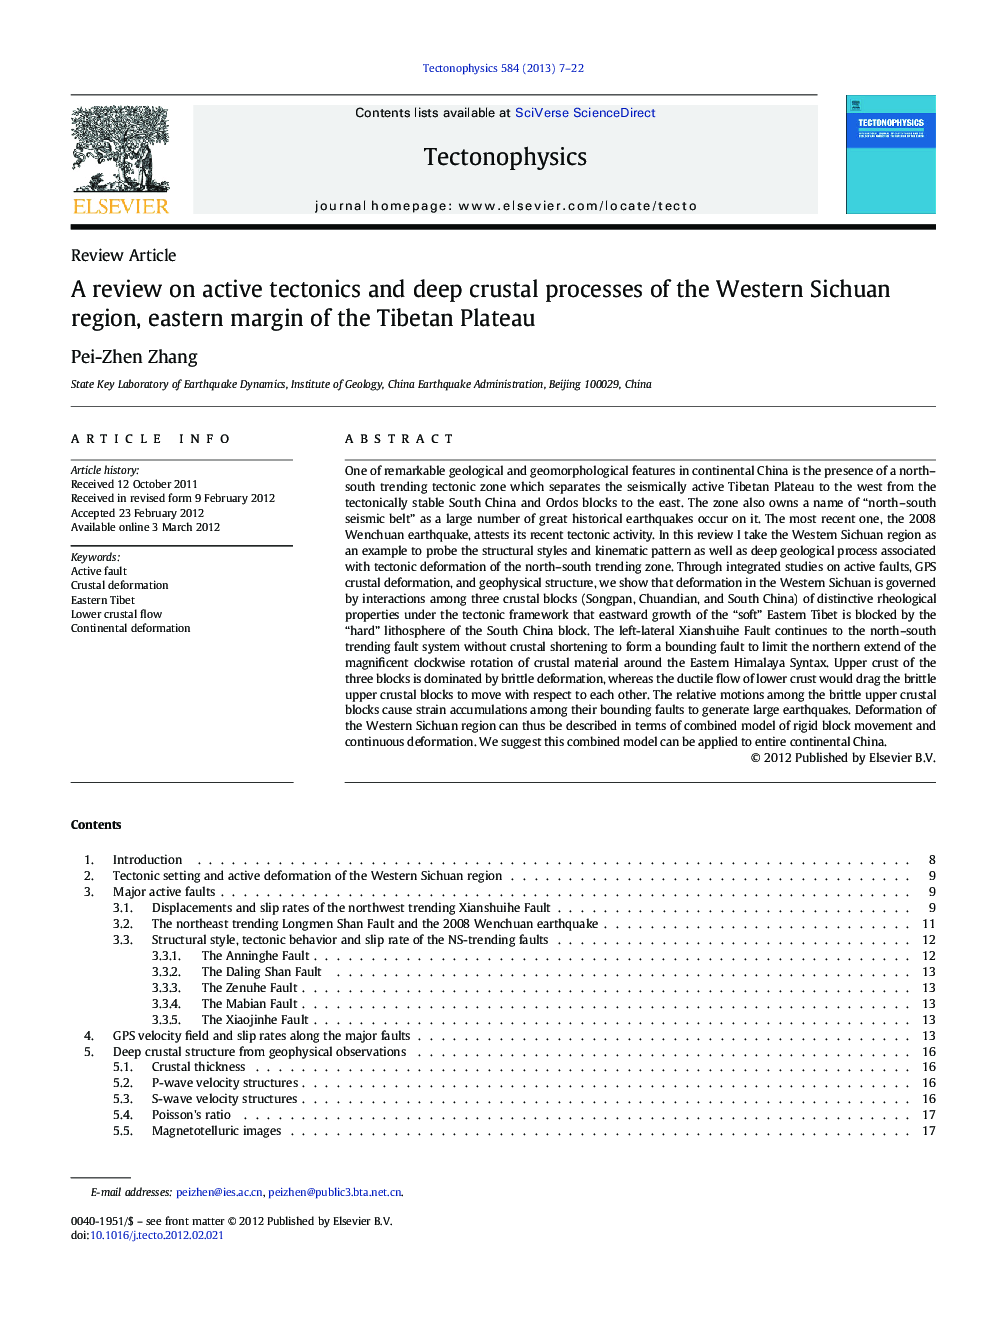 A review on active tectonics and deep crustal processes of the Western Sichuan region, eastern margin of the Tibetan Plateau